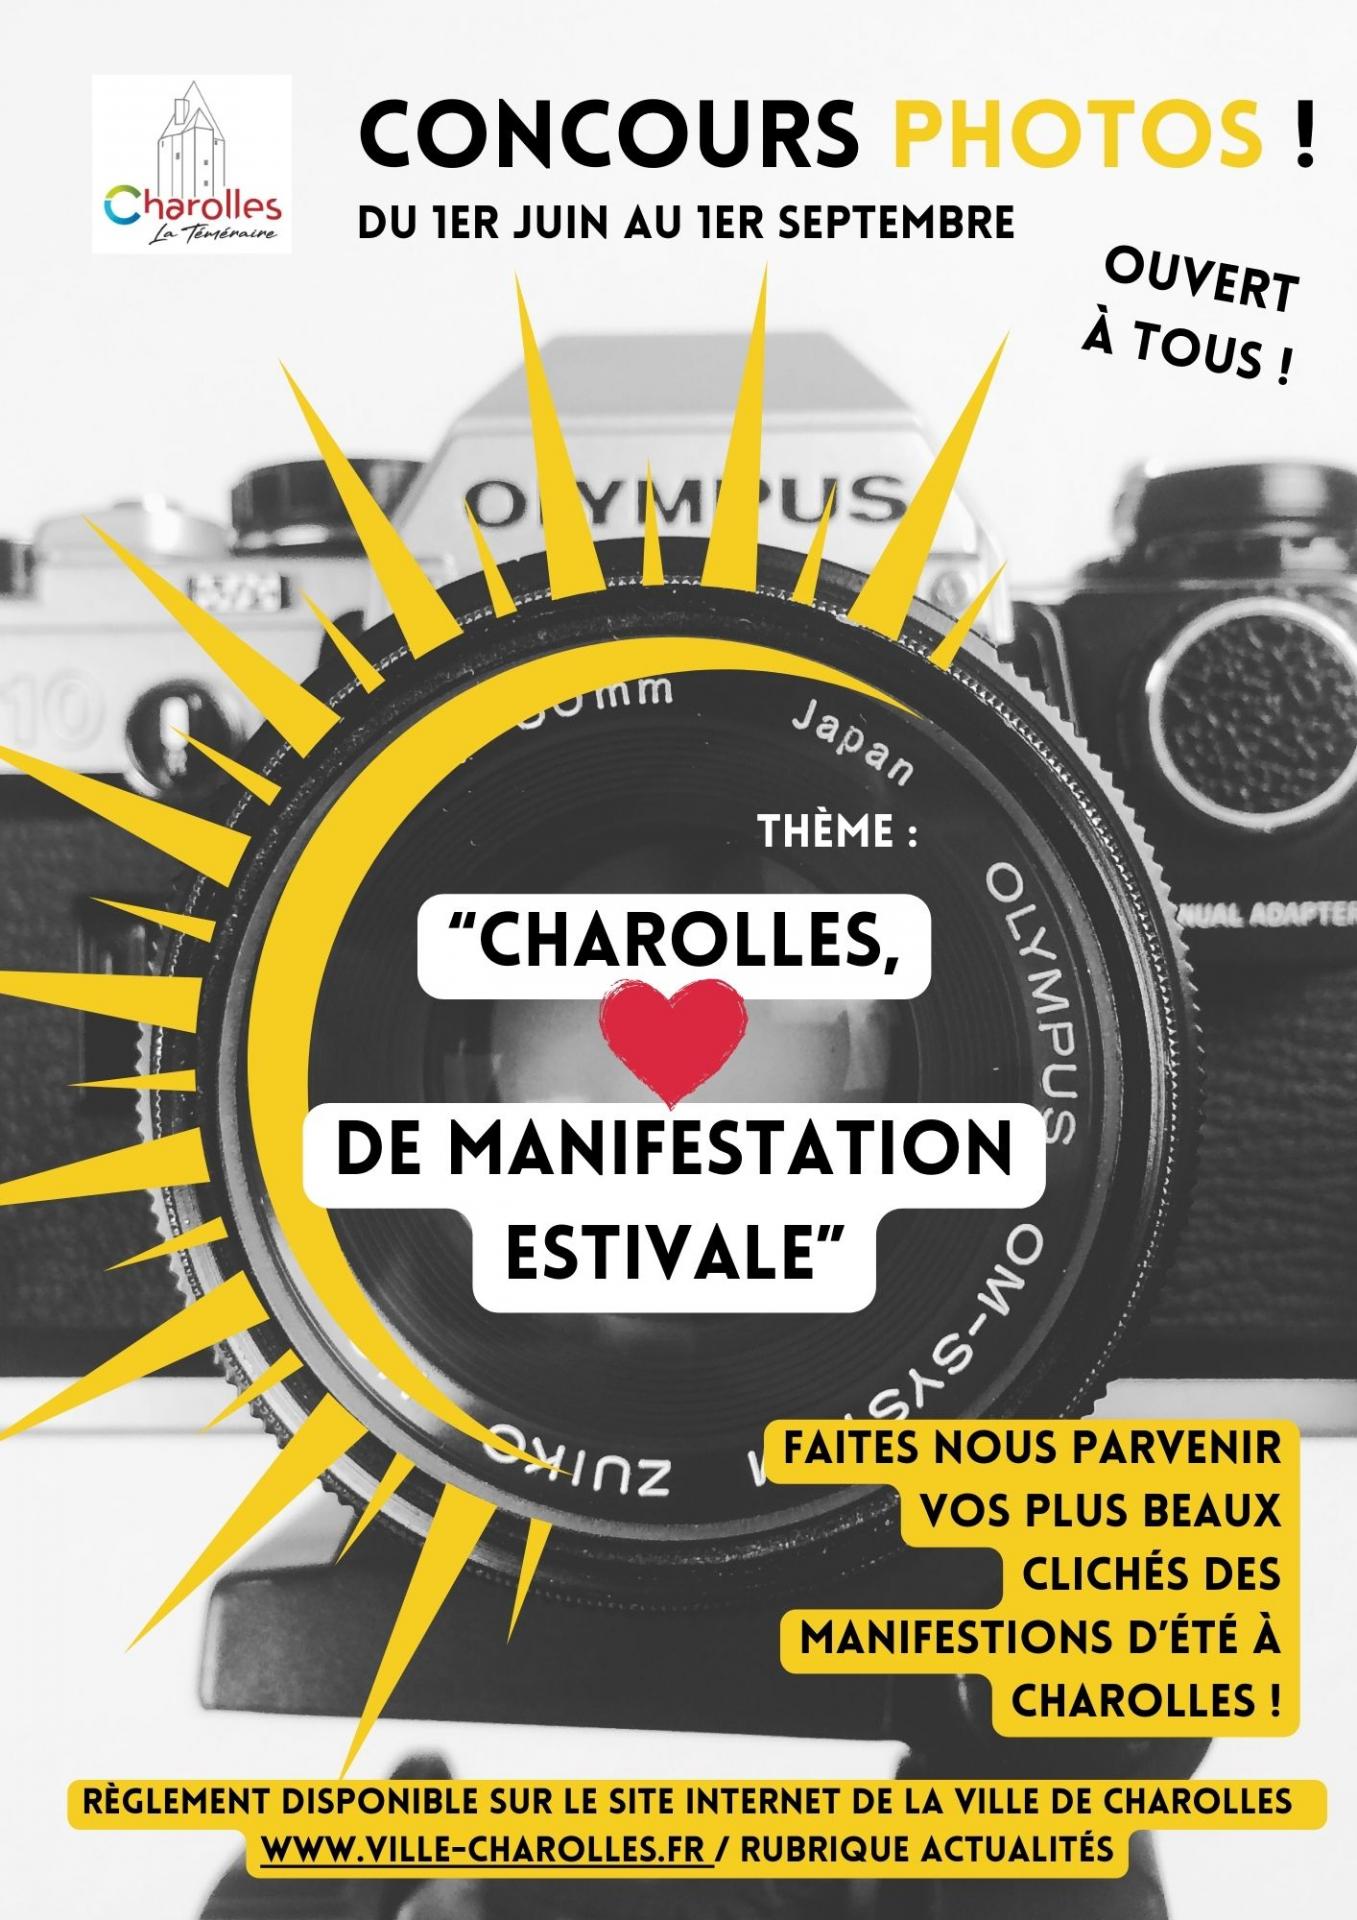 Concours photos Charolles